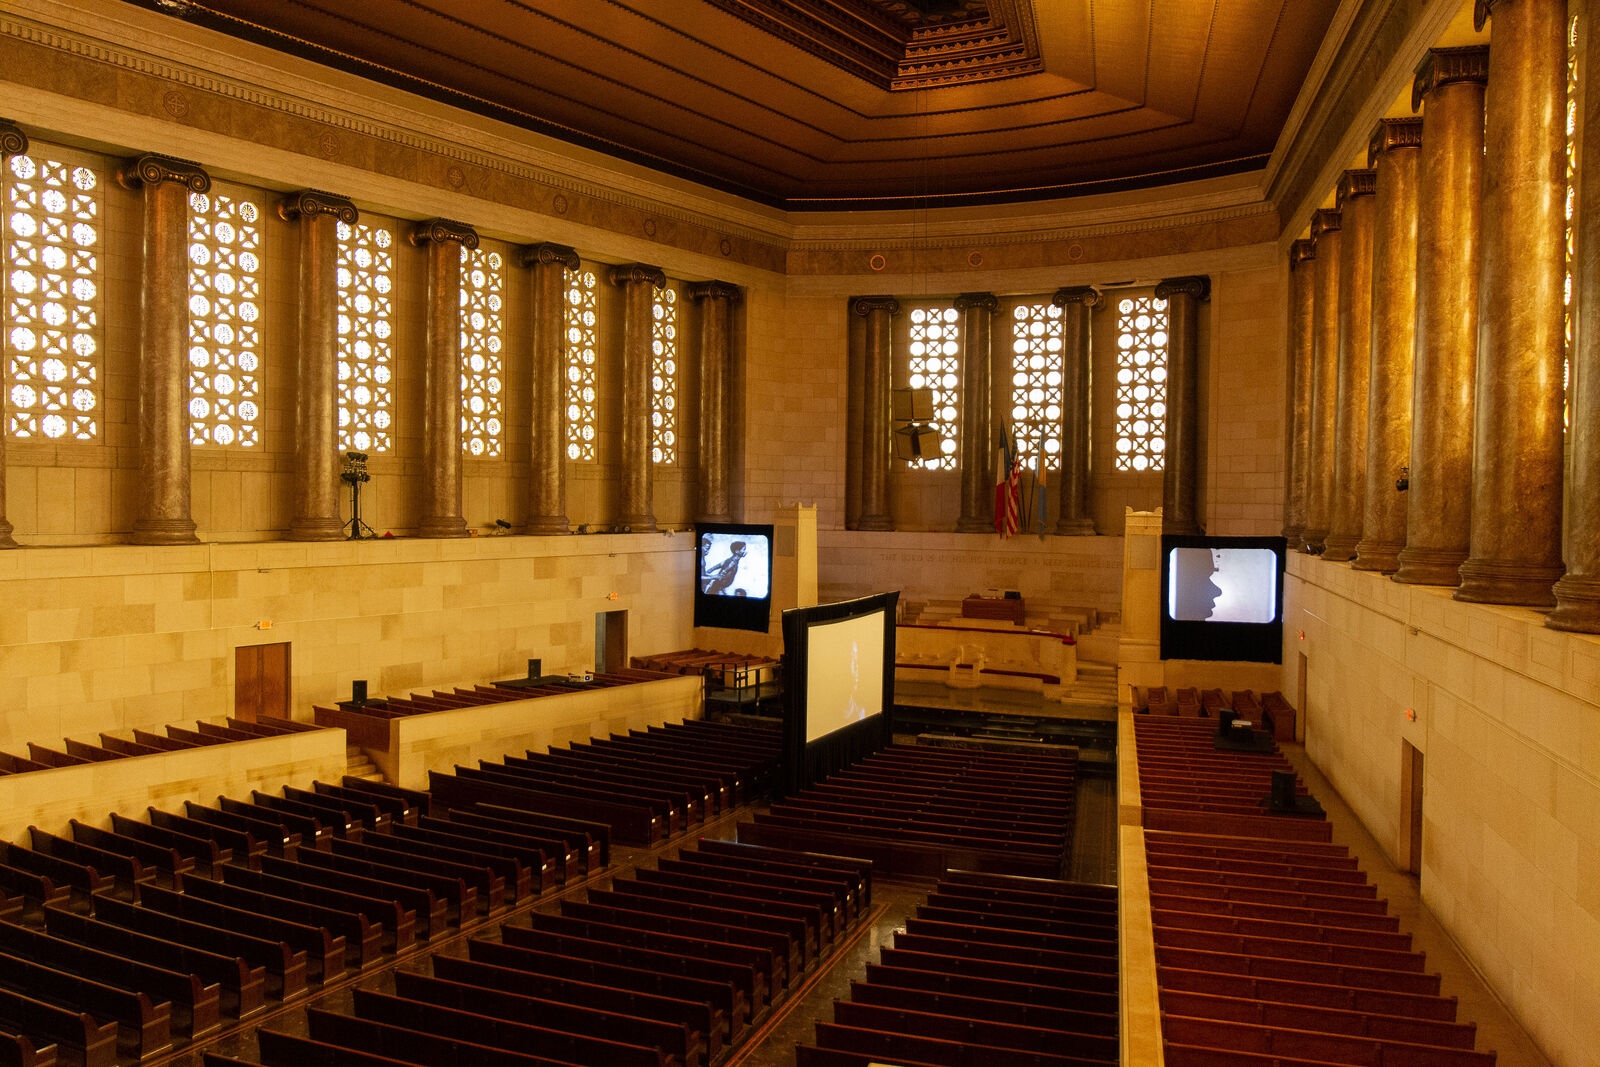 interior of a church dimly lit with multiple project screens with films playing inside the space